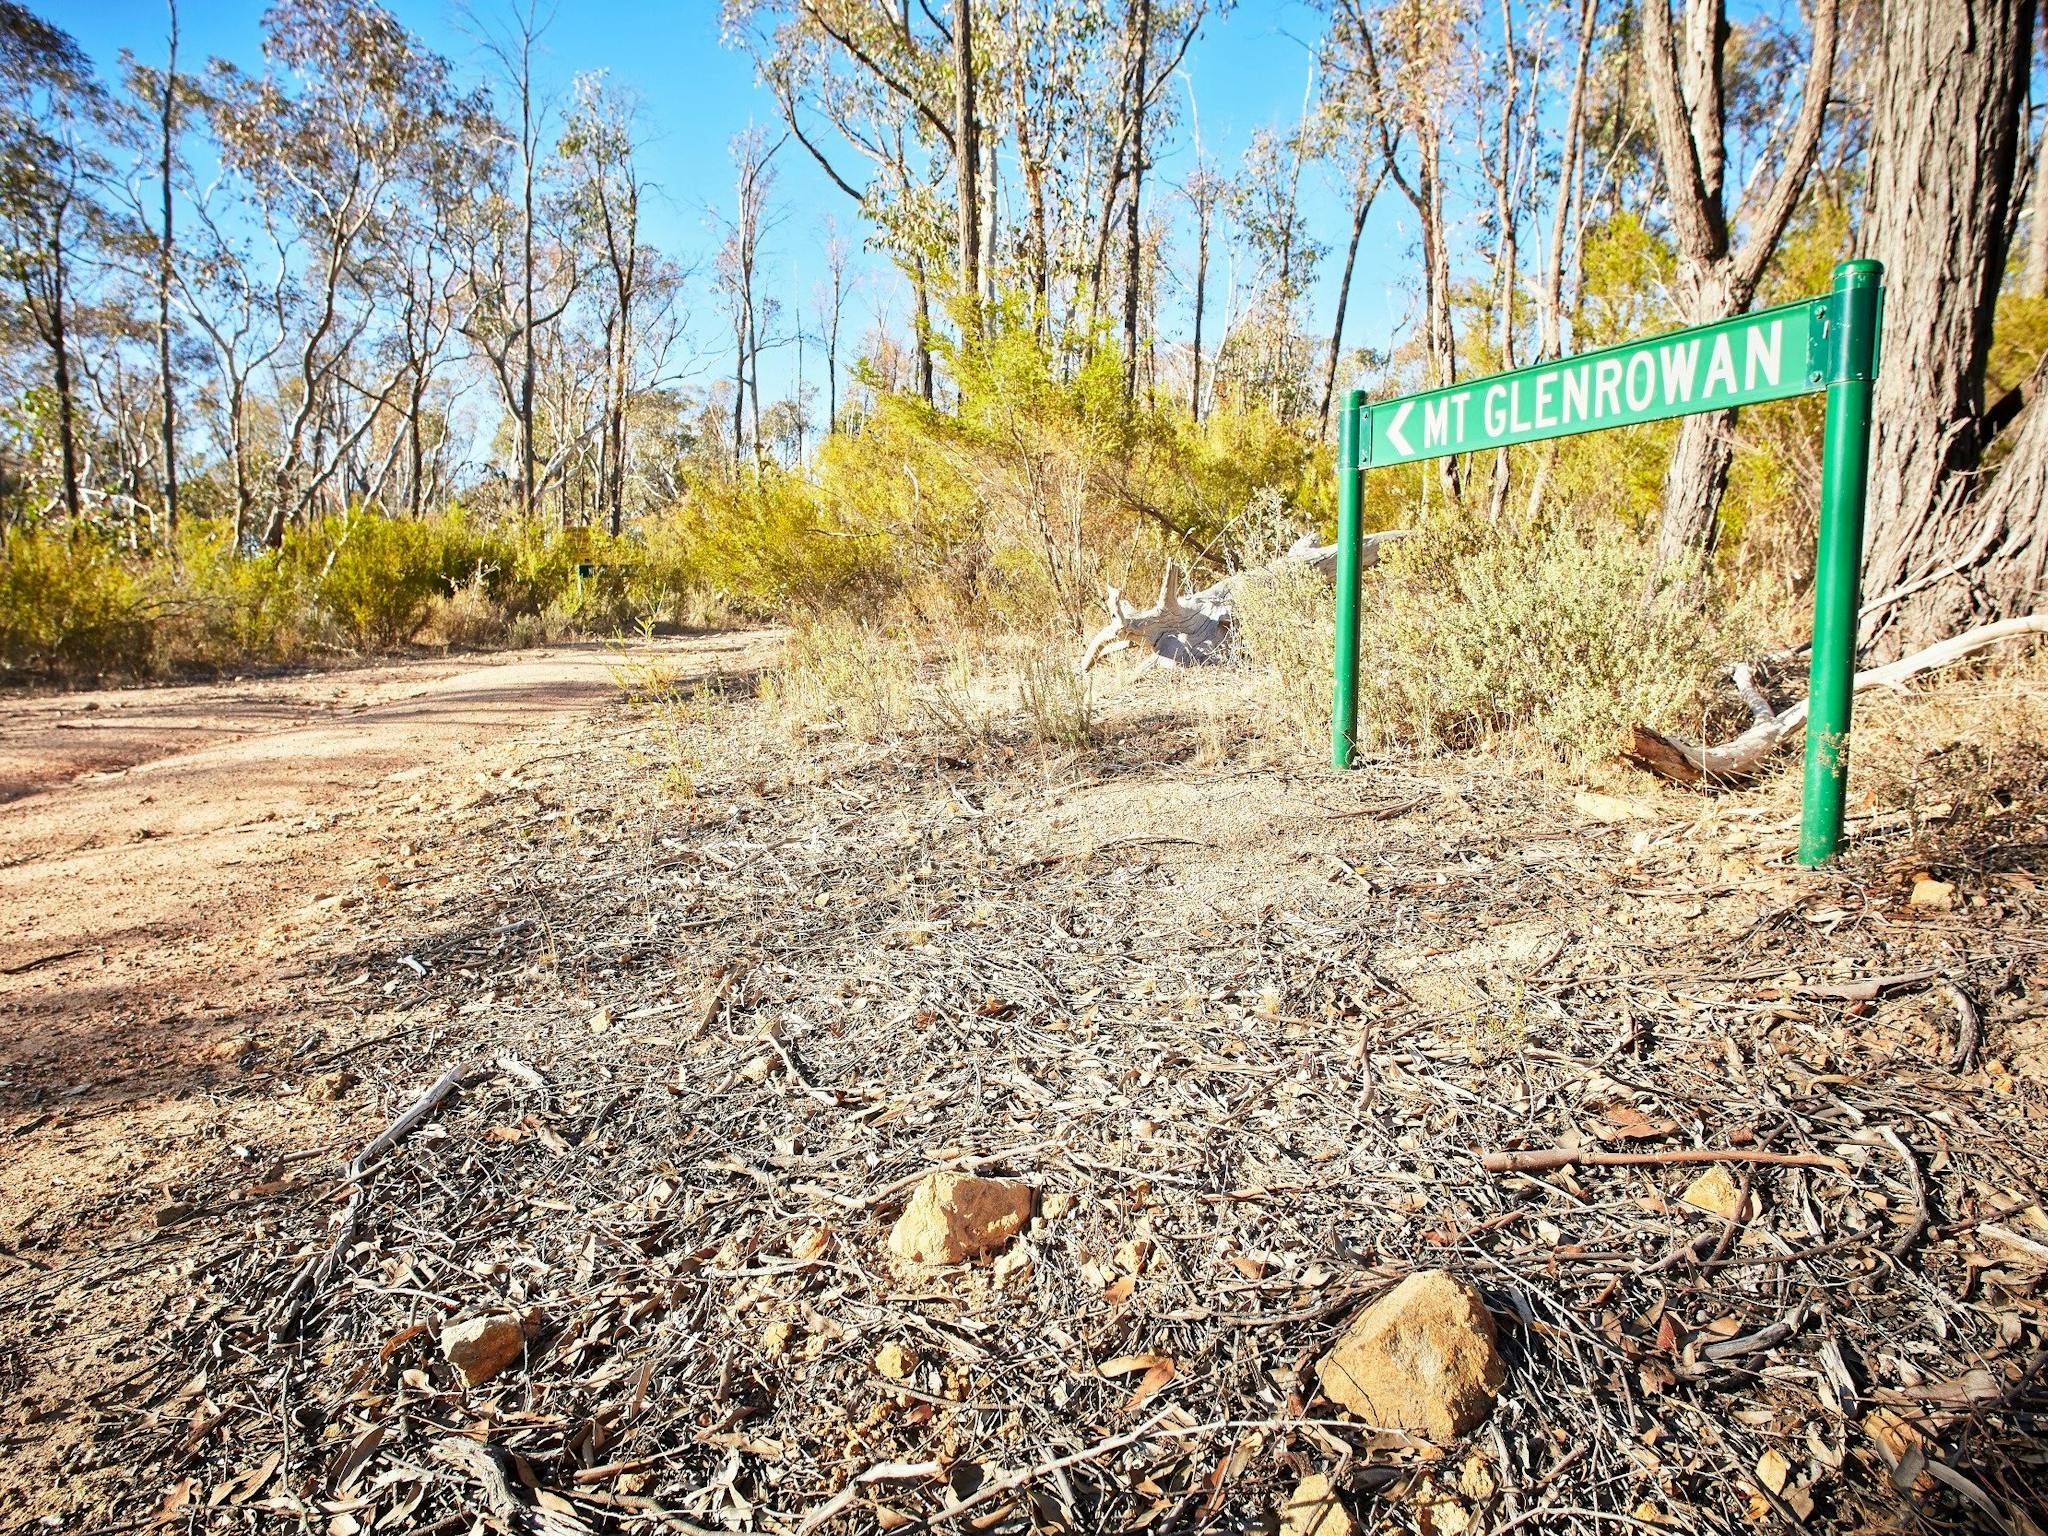 Green directional sign to Mt Glenrowan, dried leaves, rocks, road, green bushes, gum trees, blue sky